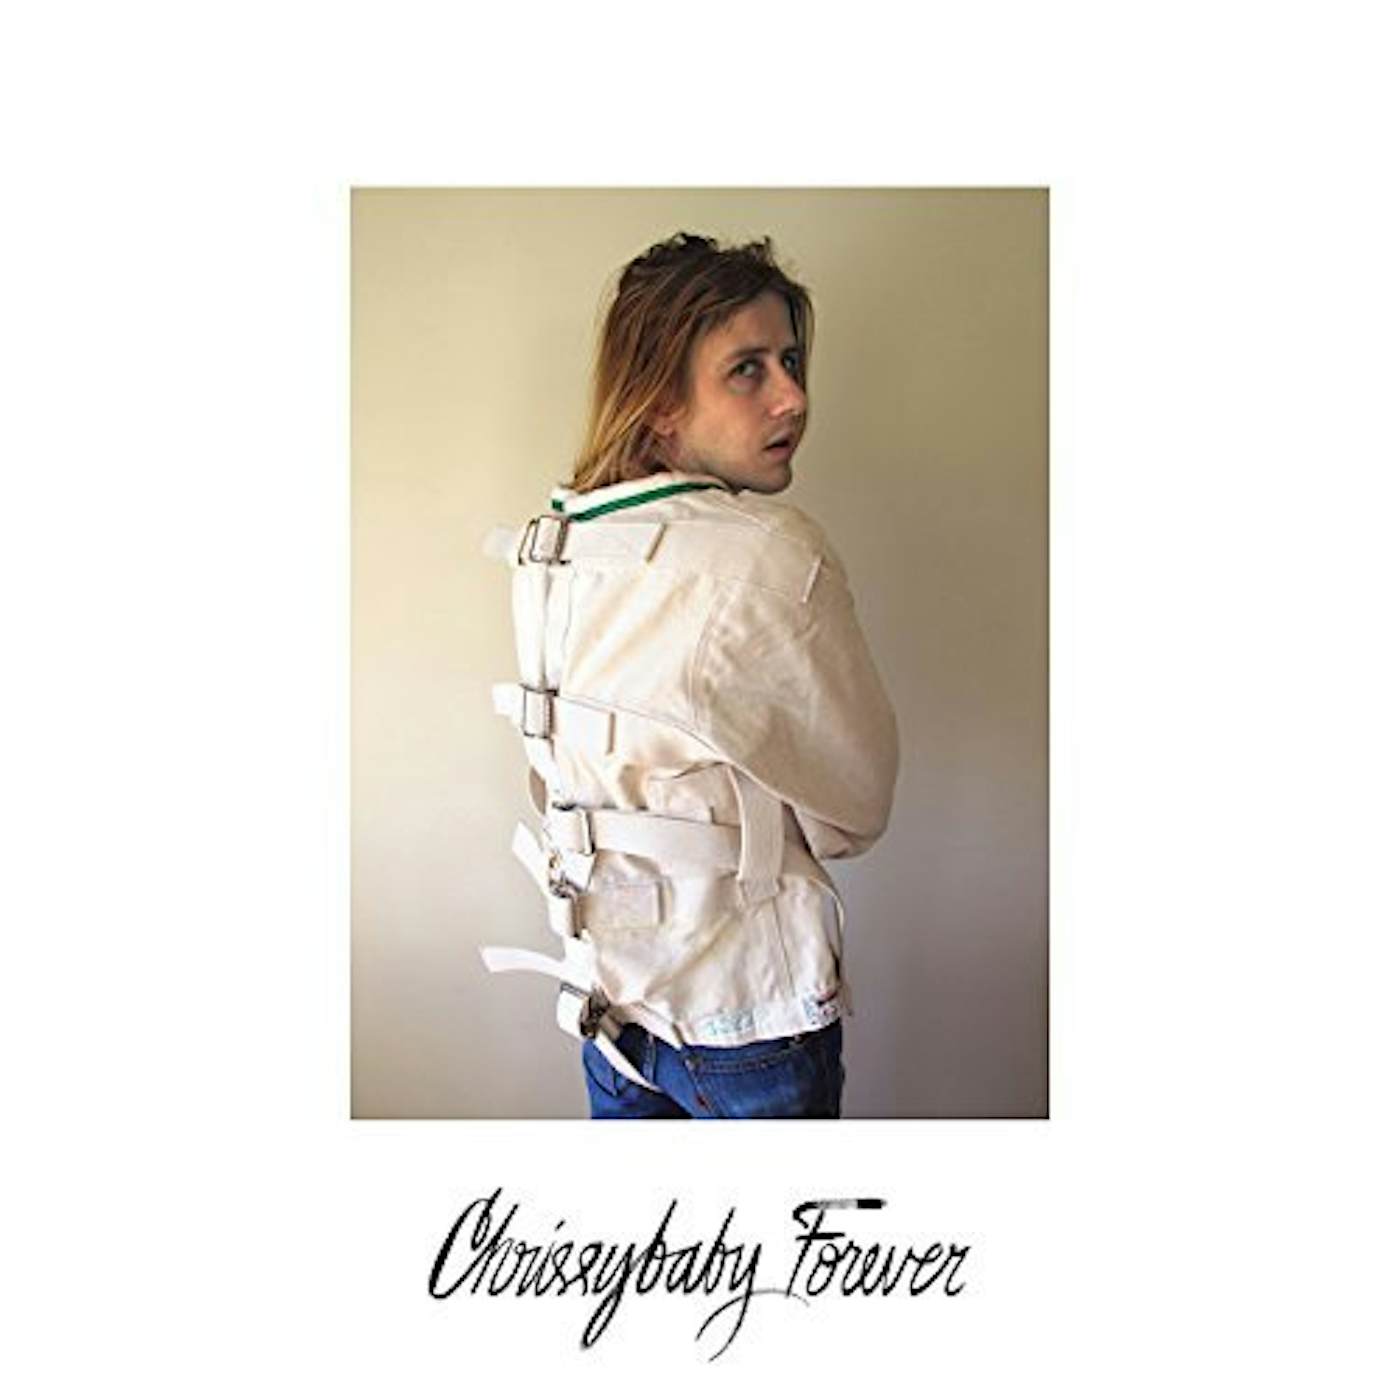 Christopher Owens CHRISSYBABY FOREVER CD